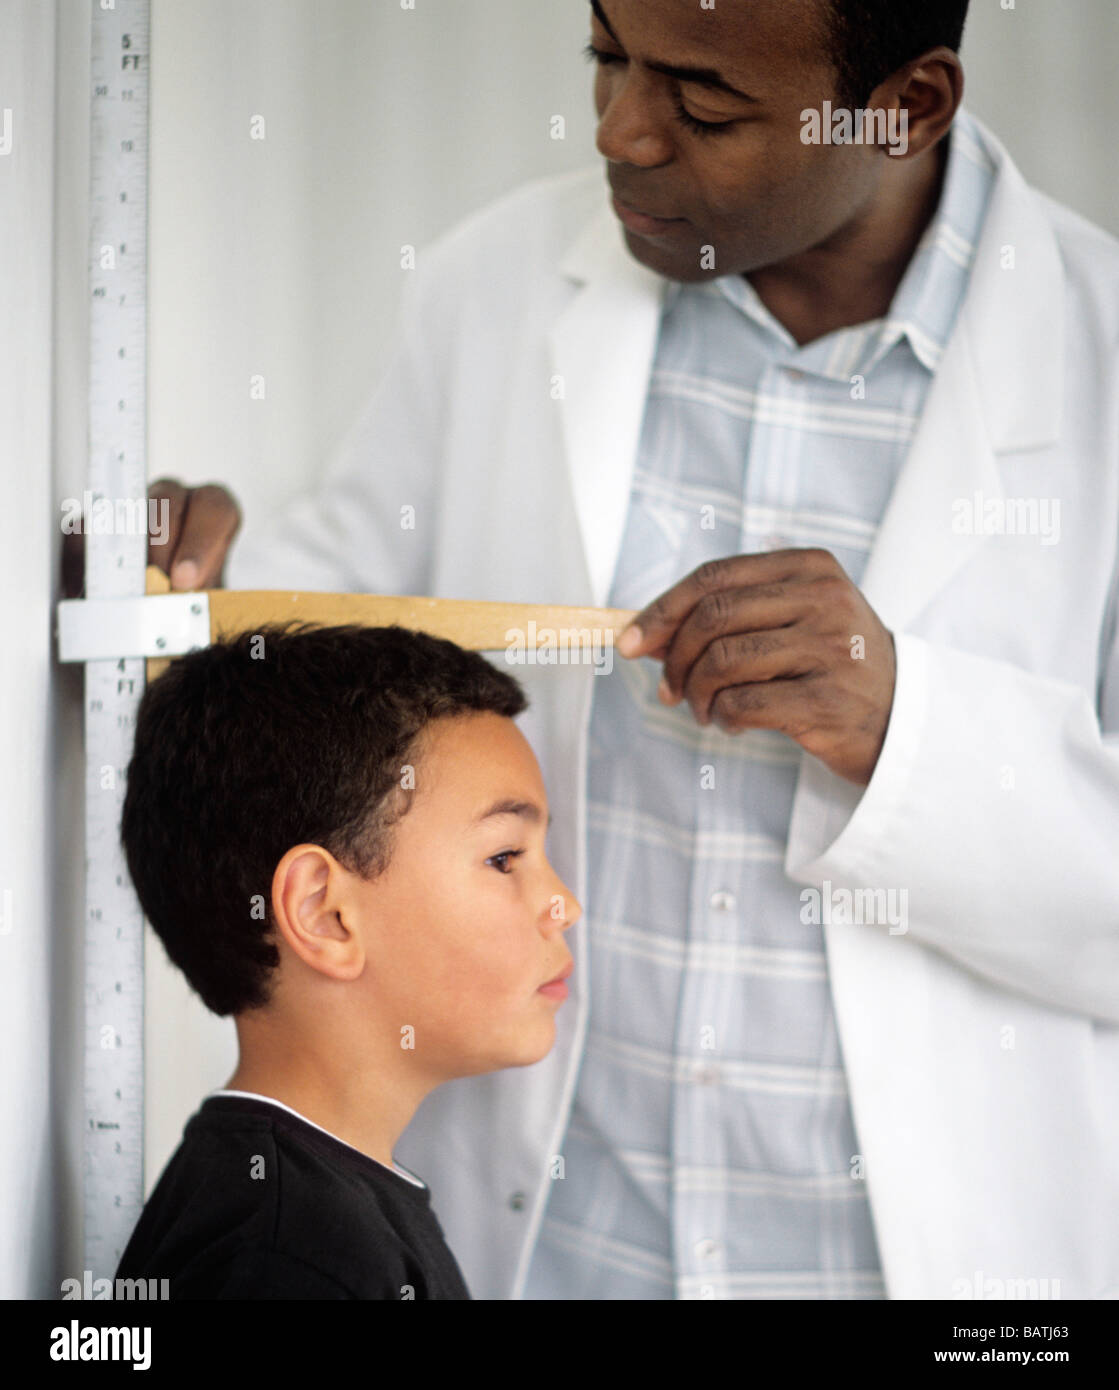 Height measurement. 7 year old boy having his height measured by a doctor. Stock Photo